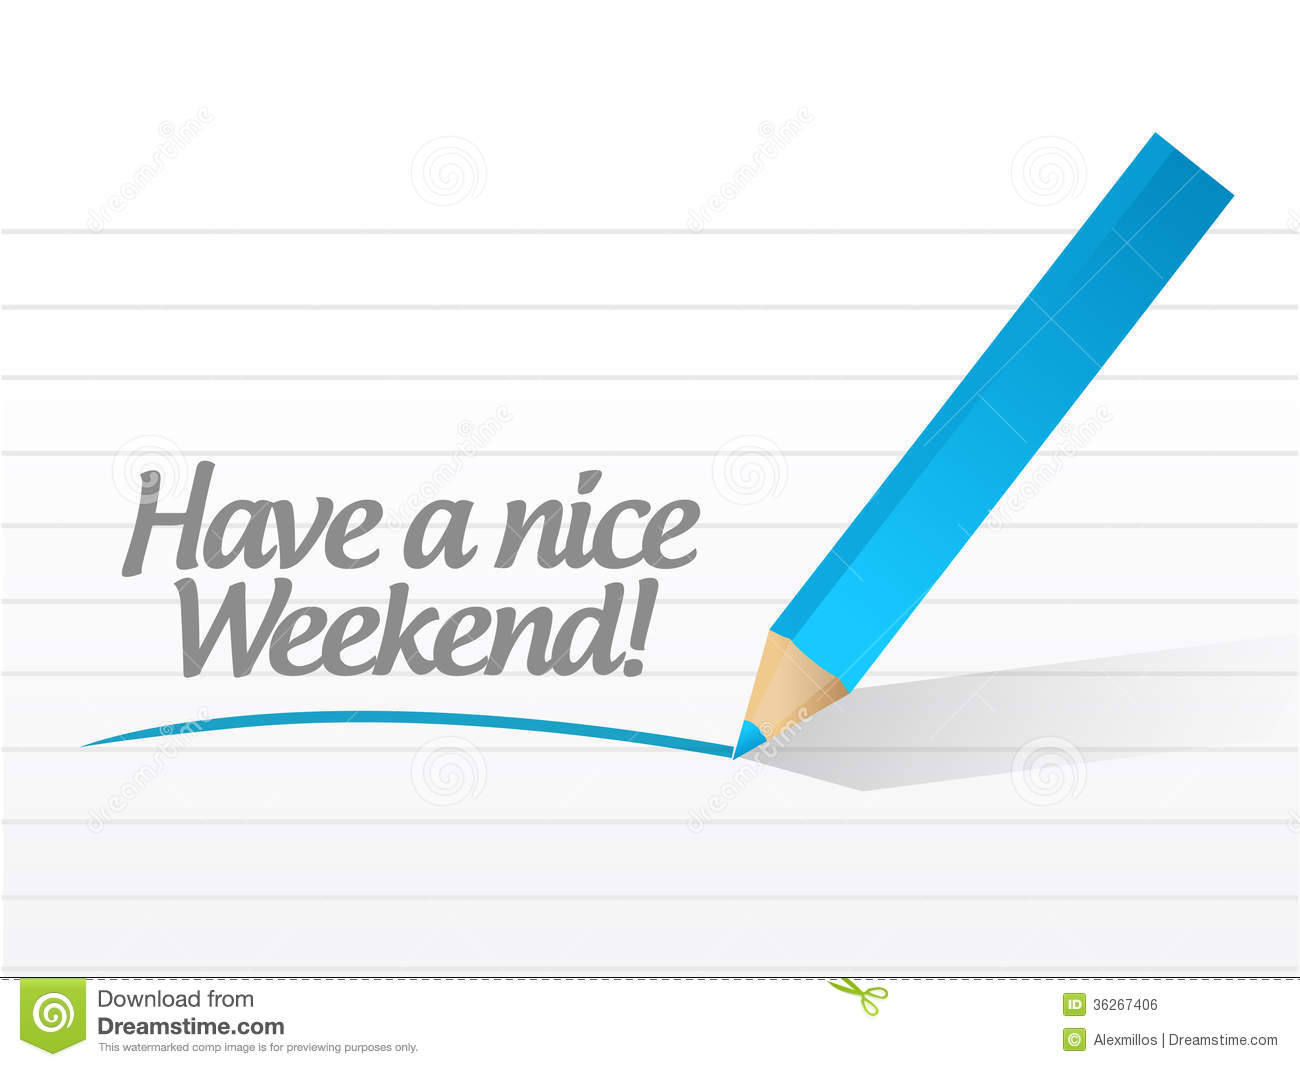 Have A Nice Weekend Illustration Design Royalty Free Stock Image